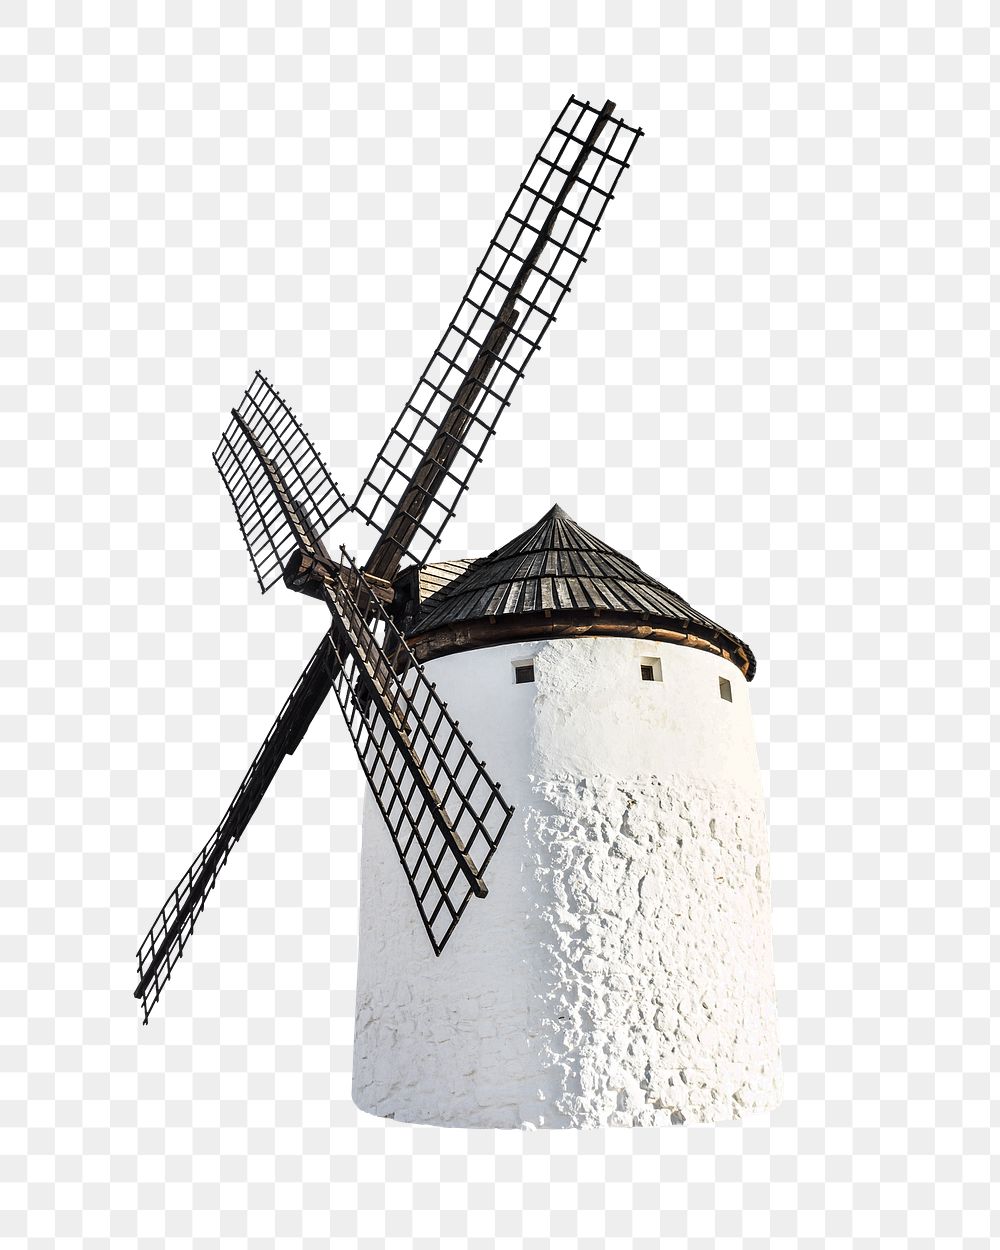 Windmill png sticker, farming image on transparent background